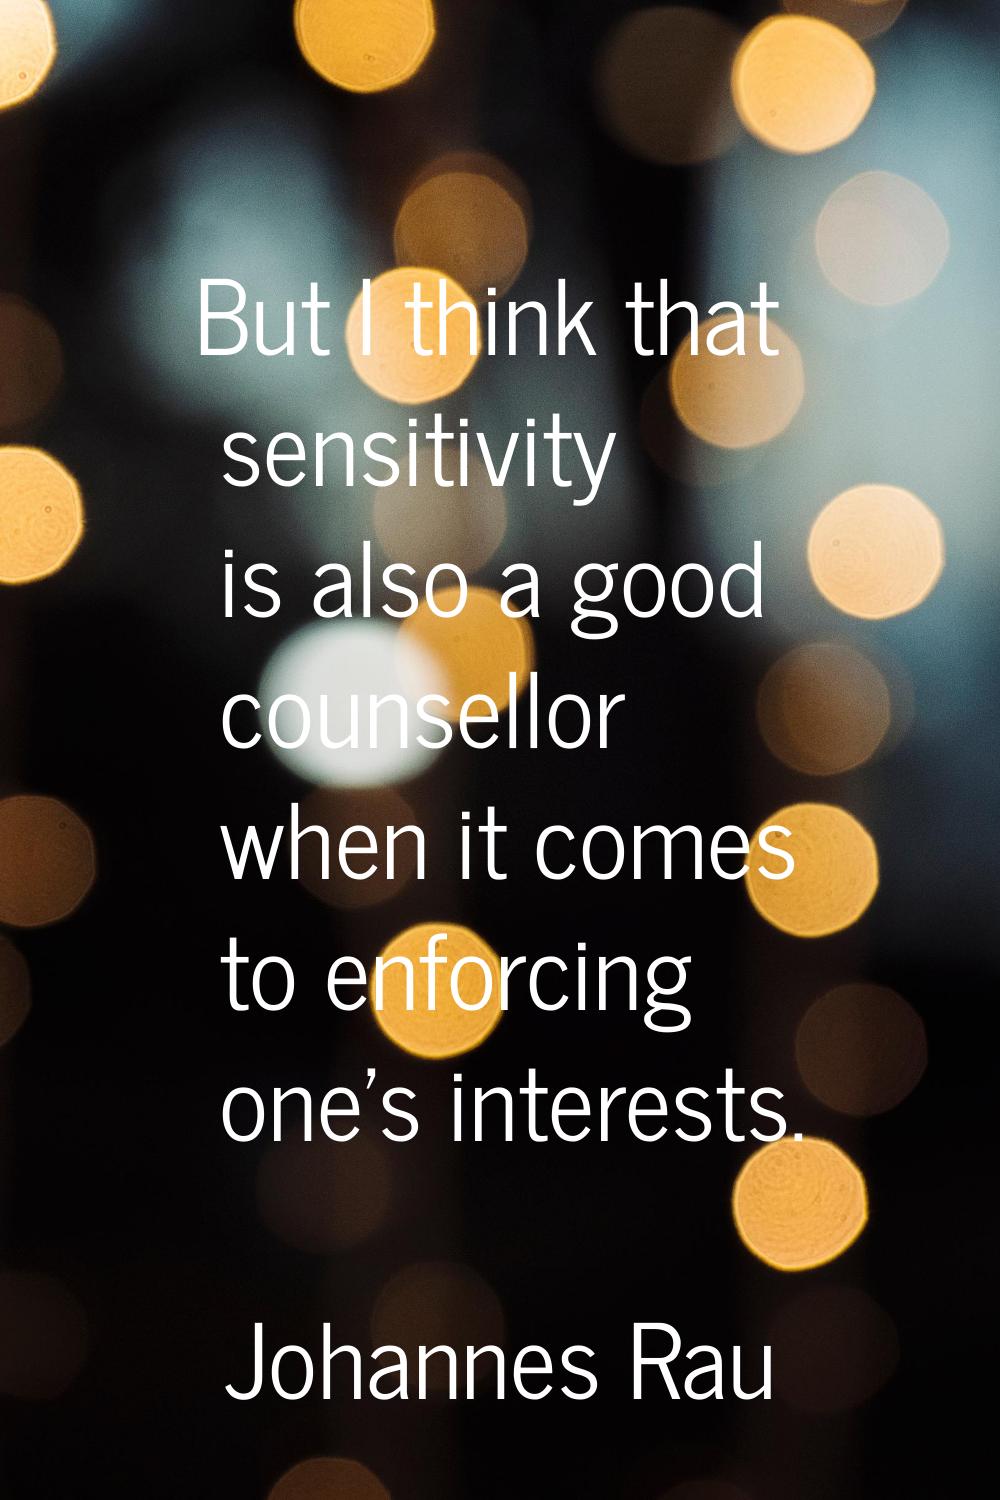 But I think that sensitivity is also a good counsellor when it comes to enforcing one's interests.